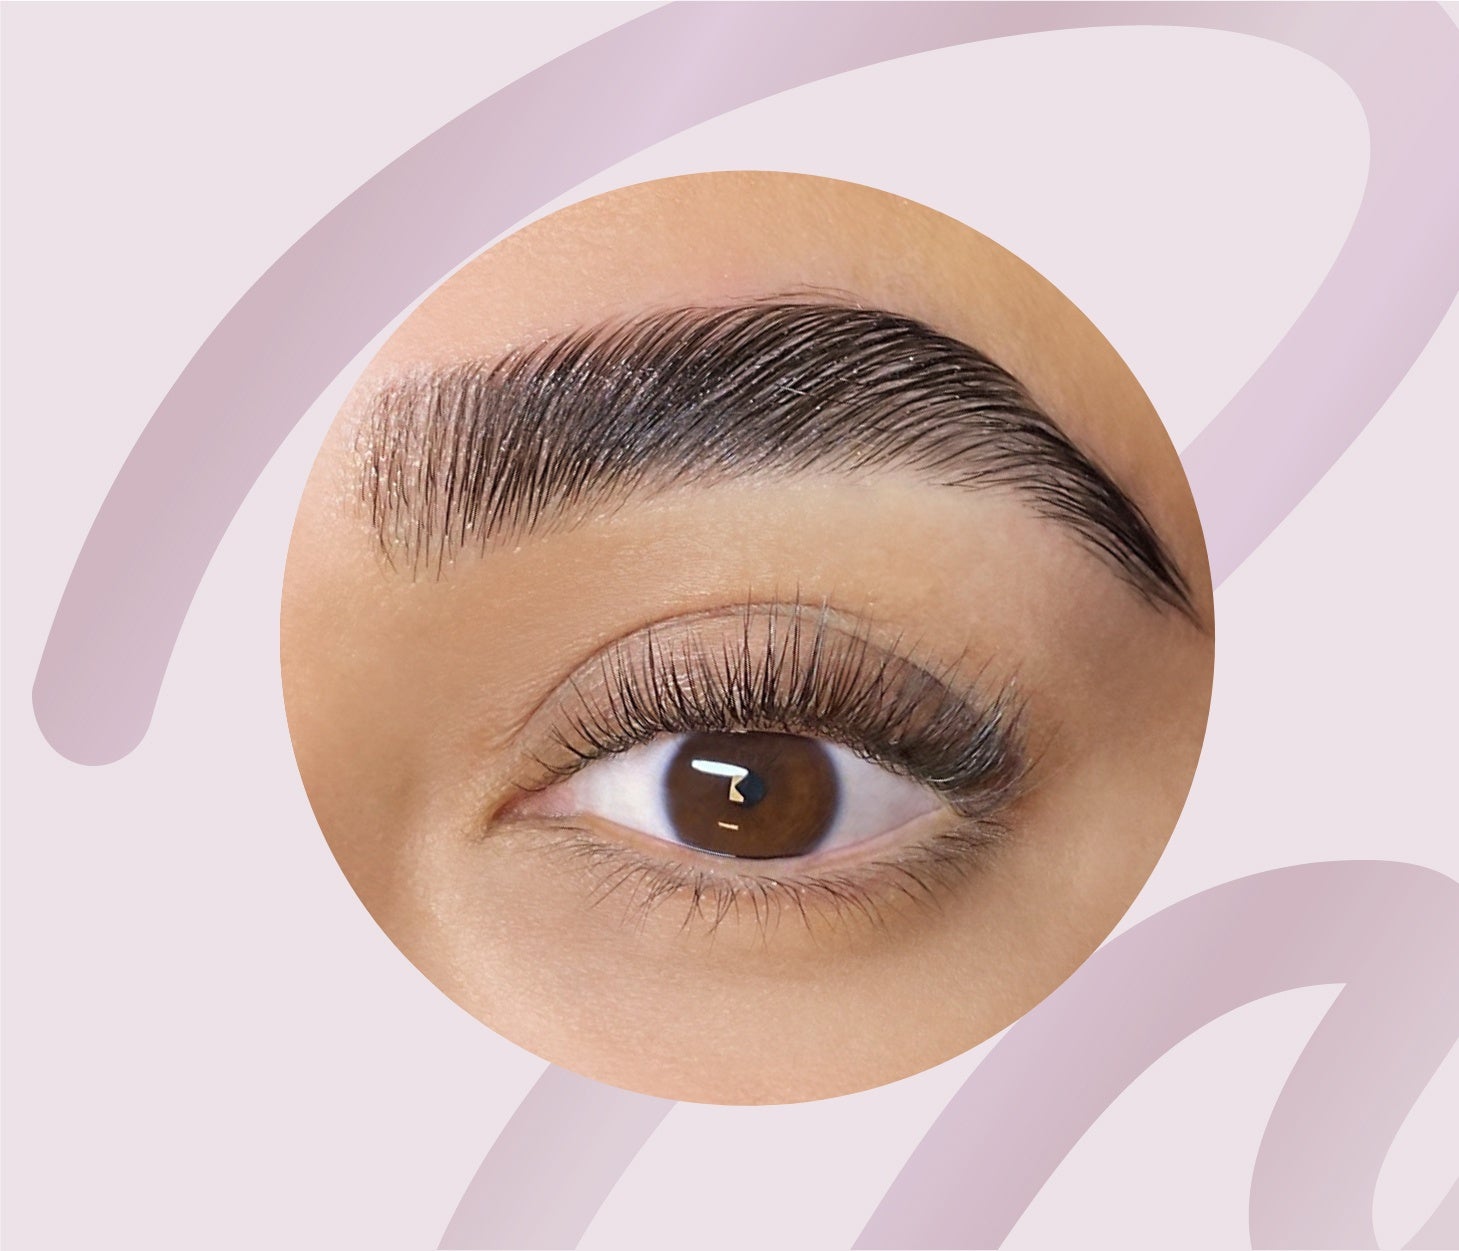 Close-up of a woman's eye with a beautifully executed lash lift at The Lash Lounge, showcasing fuller, uplifted eyelashes.